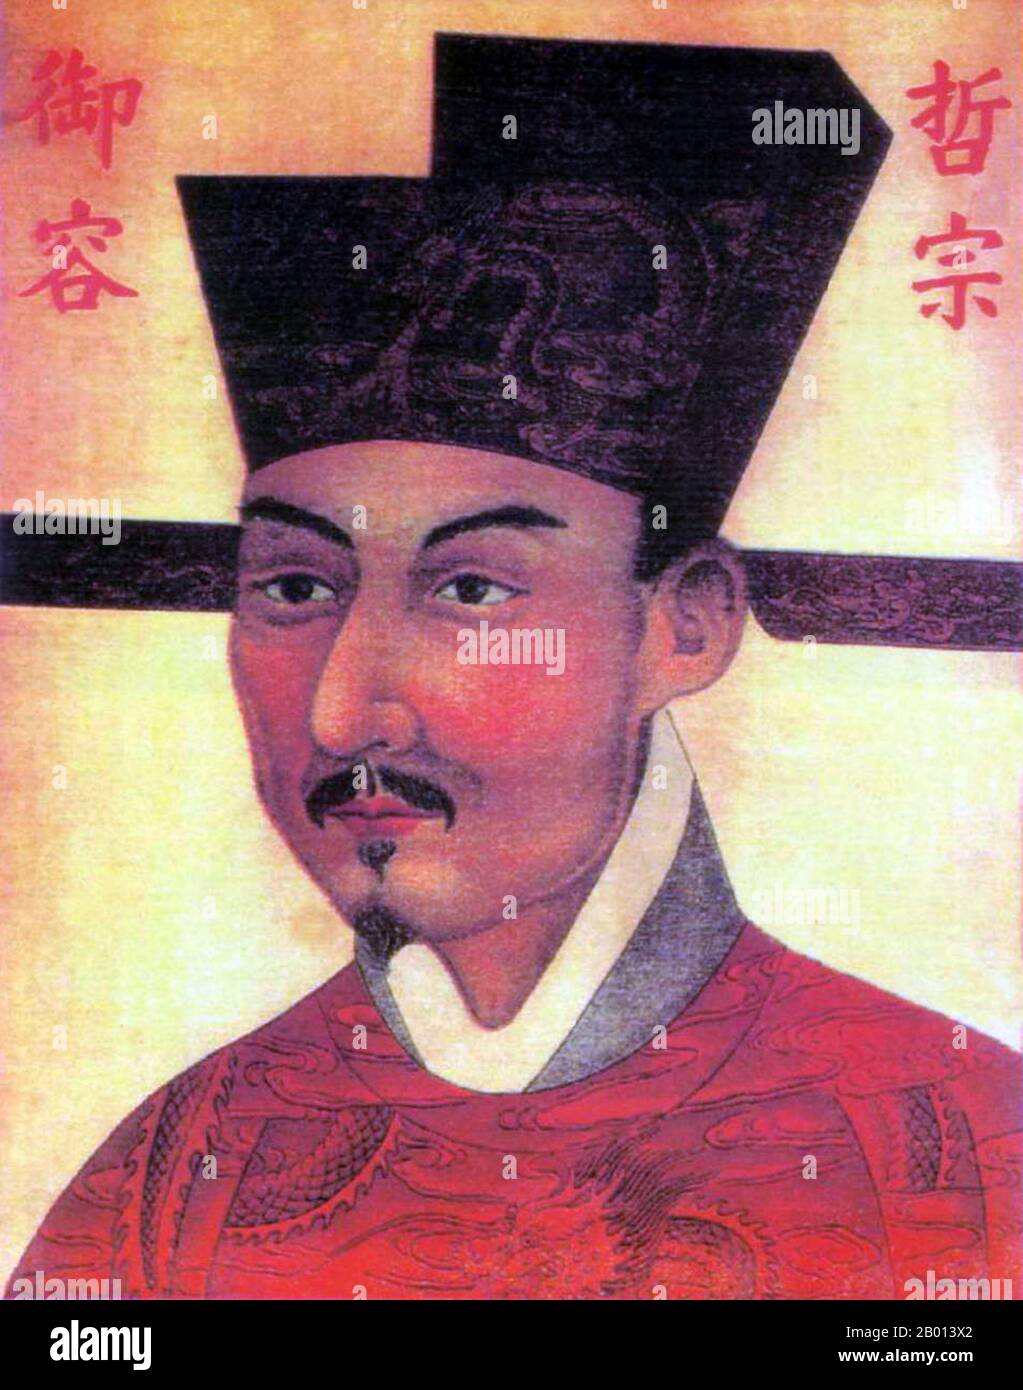 China: Emperor Zhezong (Zhao Xu, 4 January 1077 - 23 February 1100), 7th ruler of the (Northern) Song Dynasty (r. 1085-1100). Hanging scroll painting, c. 1085-1100.  Zhezong, personal name Zhao Xu and originally called Zhao Yong, was the son of Emperor Shenzong. He ascended the throne at age 9 under the supervision of Empress Dowager Gao. Under Empress Gao's regency she appointed conservatives such as Sima Guang as Chancellor, and Sima Guang immediately halted socio-economic improvements set forth by Wang Anshi. Zhezong was powerless until Empress Dowager Gao's death in 1093. Stock Photo